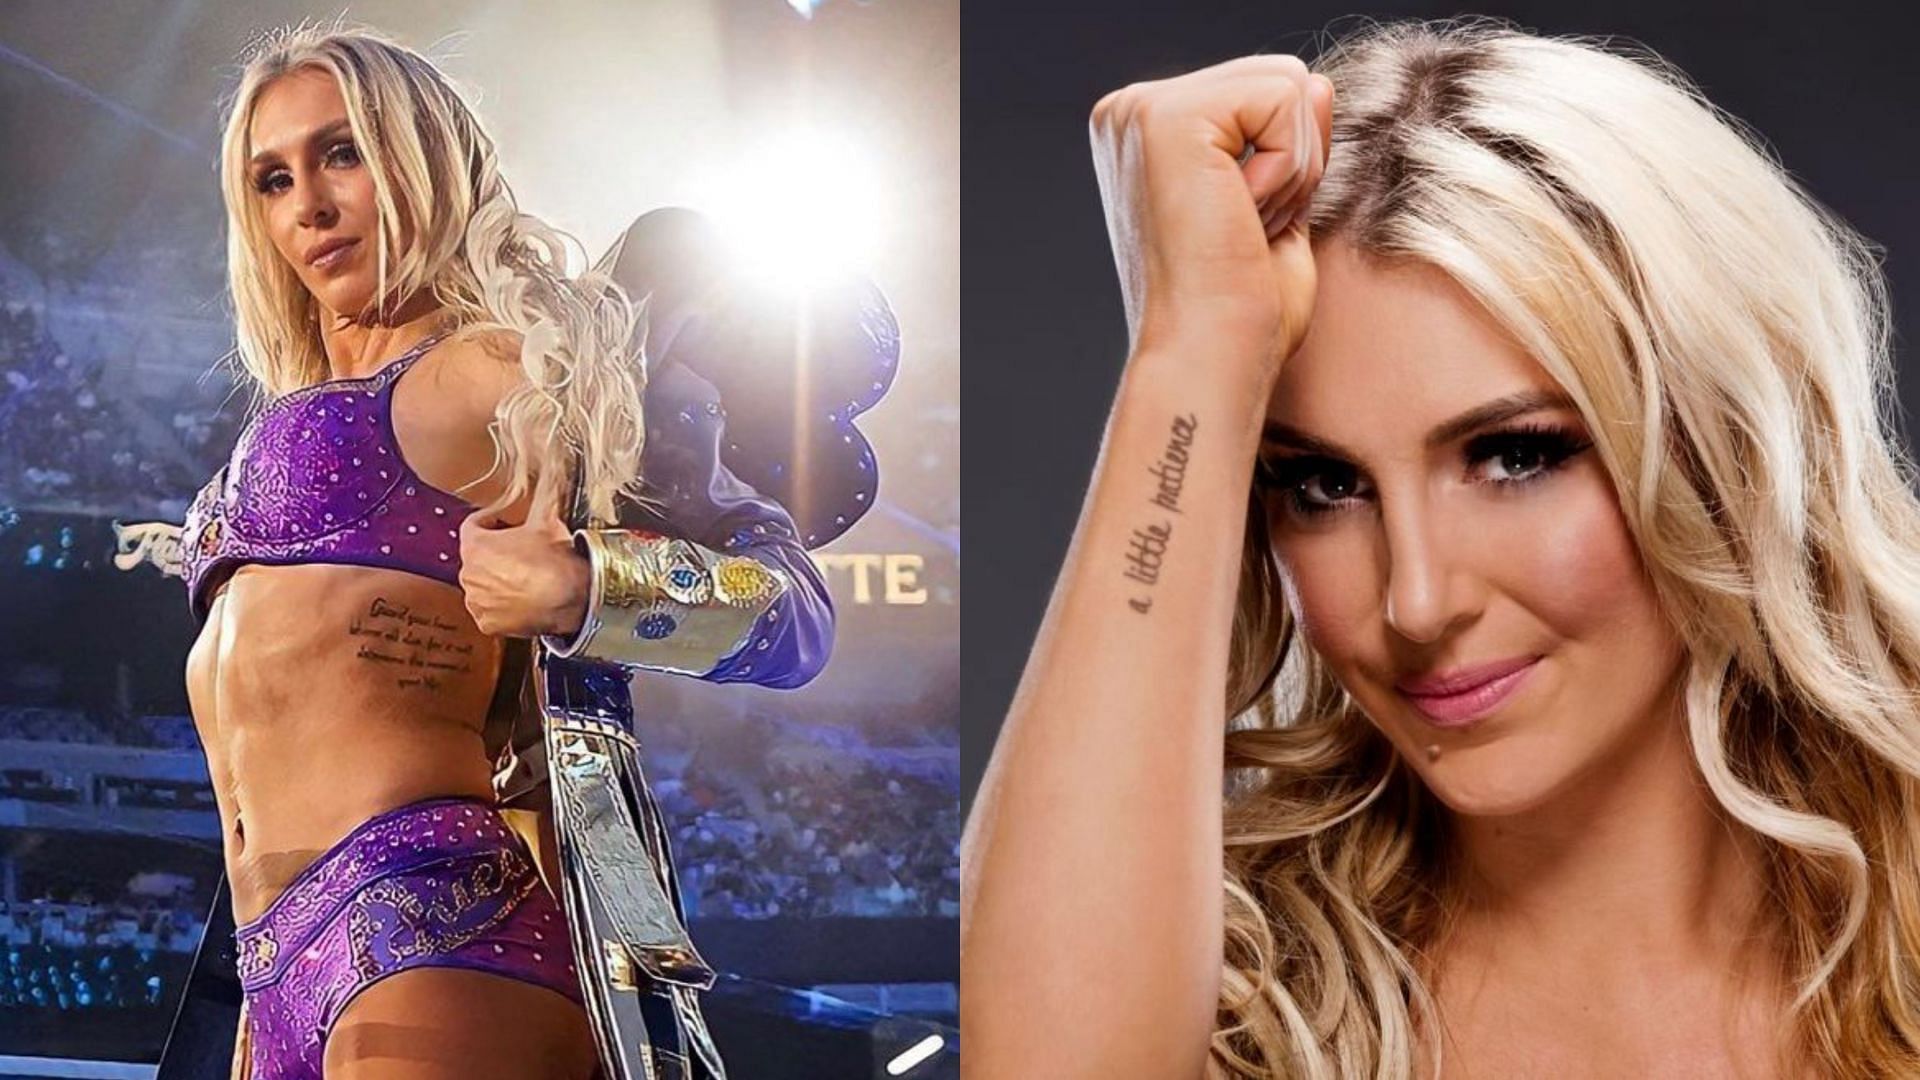 Five famous Charlotte Flair tattoos and their meanings